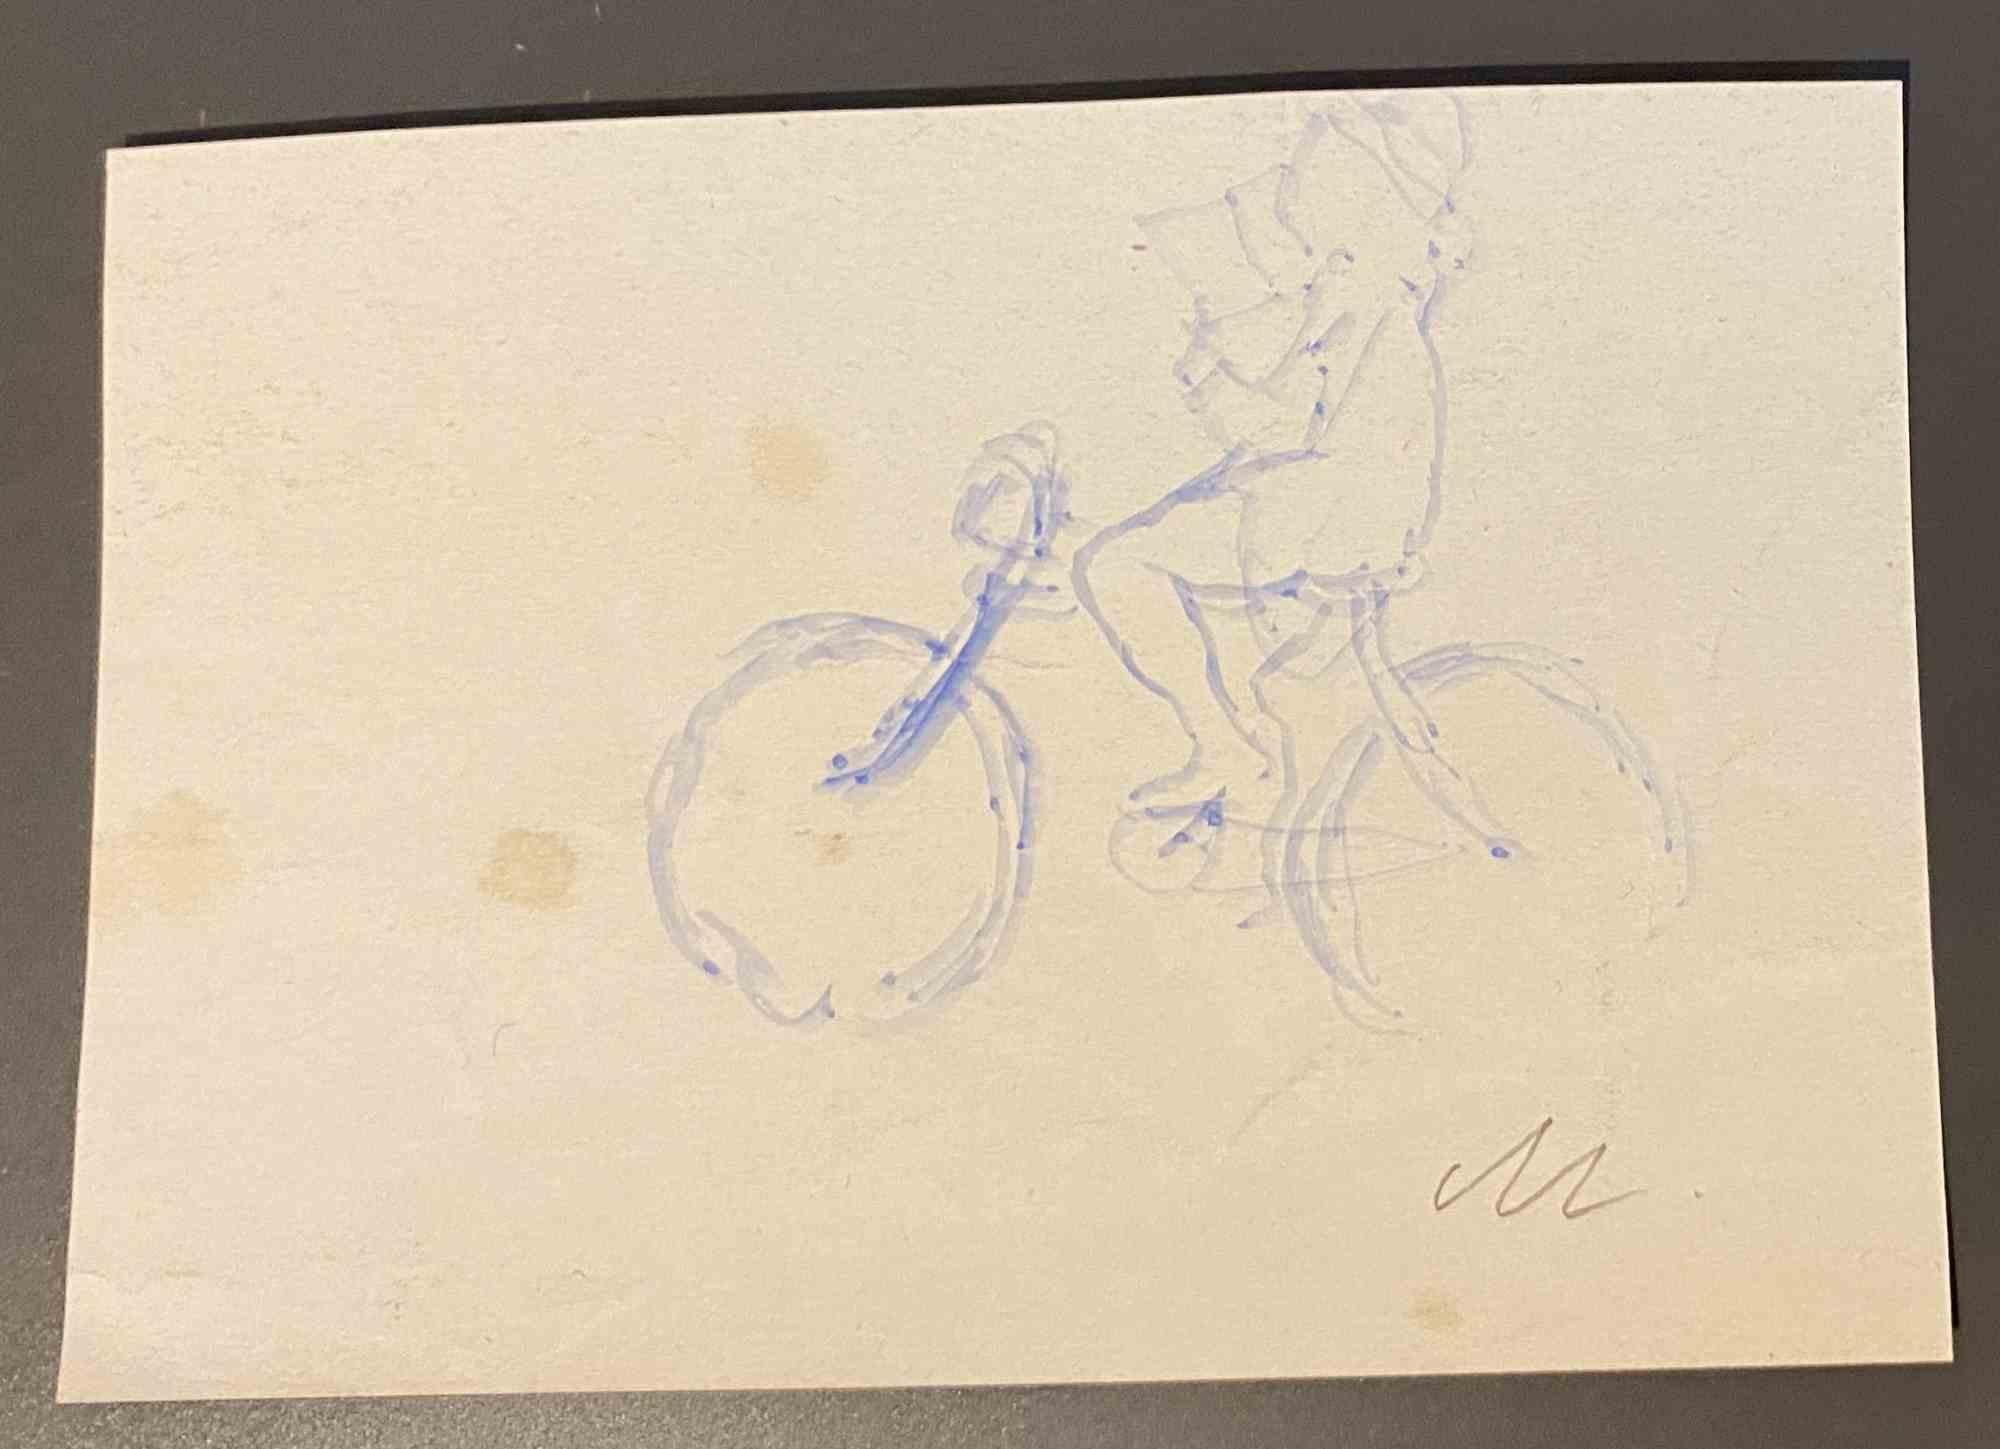 Bicycle is a marker realized by Mino Maccari  (1924-1989) in the Mid-20th Century.

Monogrammed.

Good conditions.

Mino Maccari (Siena, 1924-Rome, June 16, 1989) was an Italian writer, painter, engraver and journalist, winner of the Feltrinelli